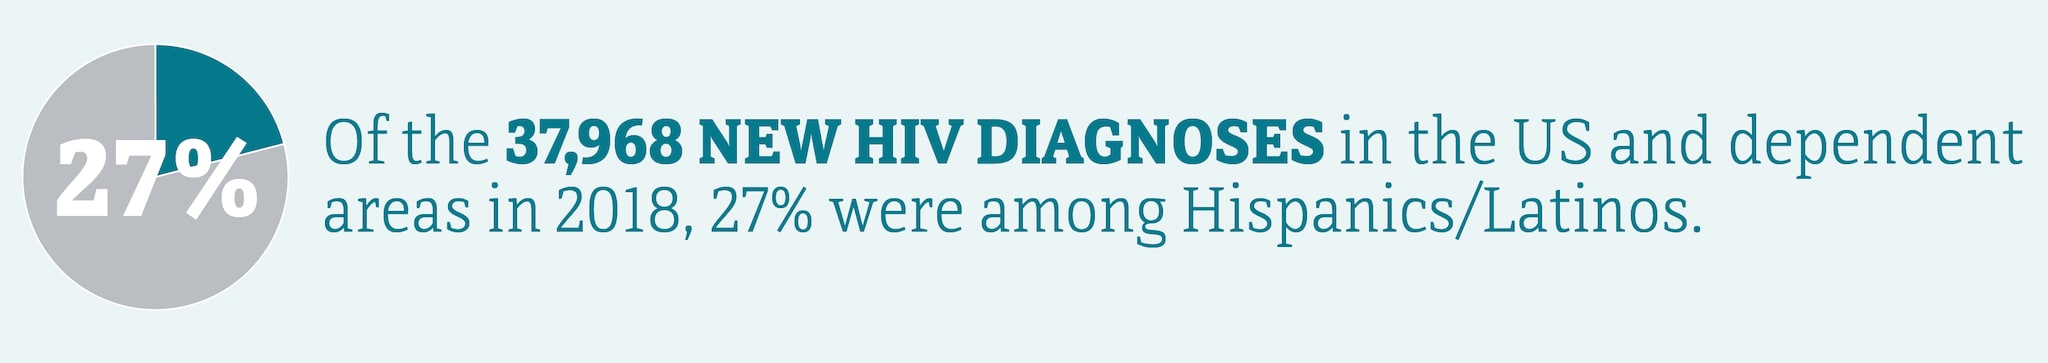 This banner shows 26% of the 38,739 new HIV diagnoses in the United States and dependent areas were among Hispanics/Latinos, 22% were among Hispanic/Latino men, and 3% were among Hispanic women/Latinas.